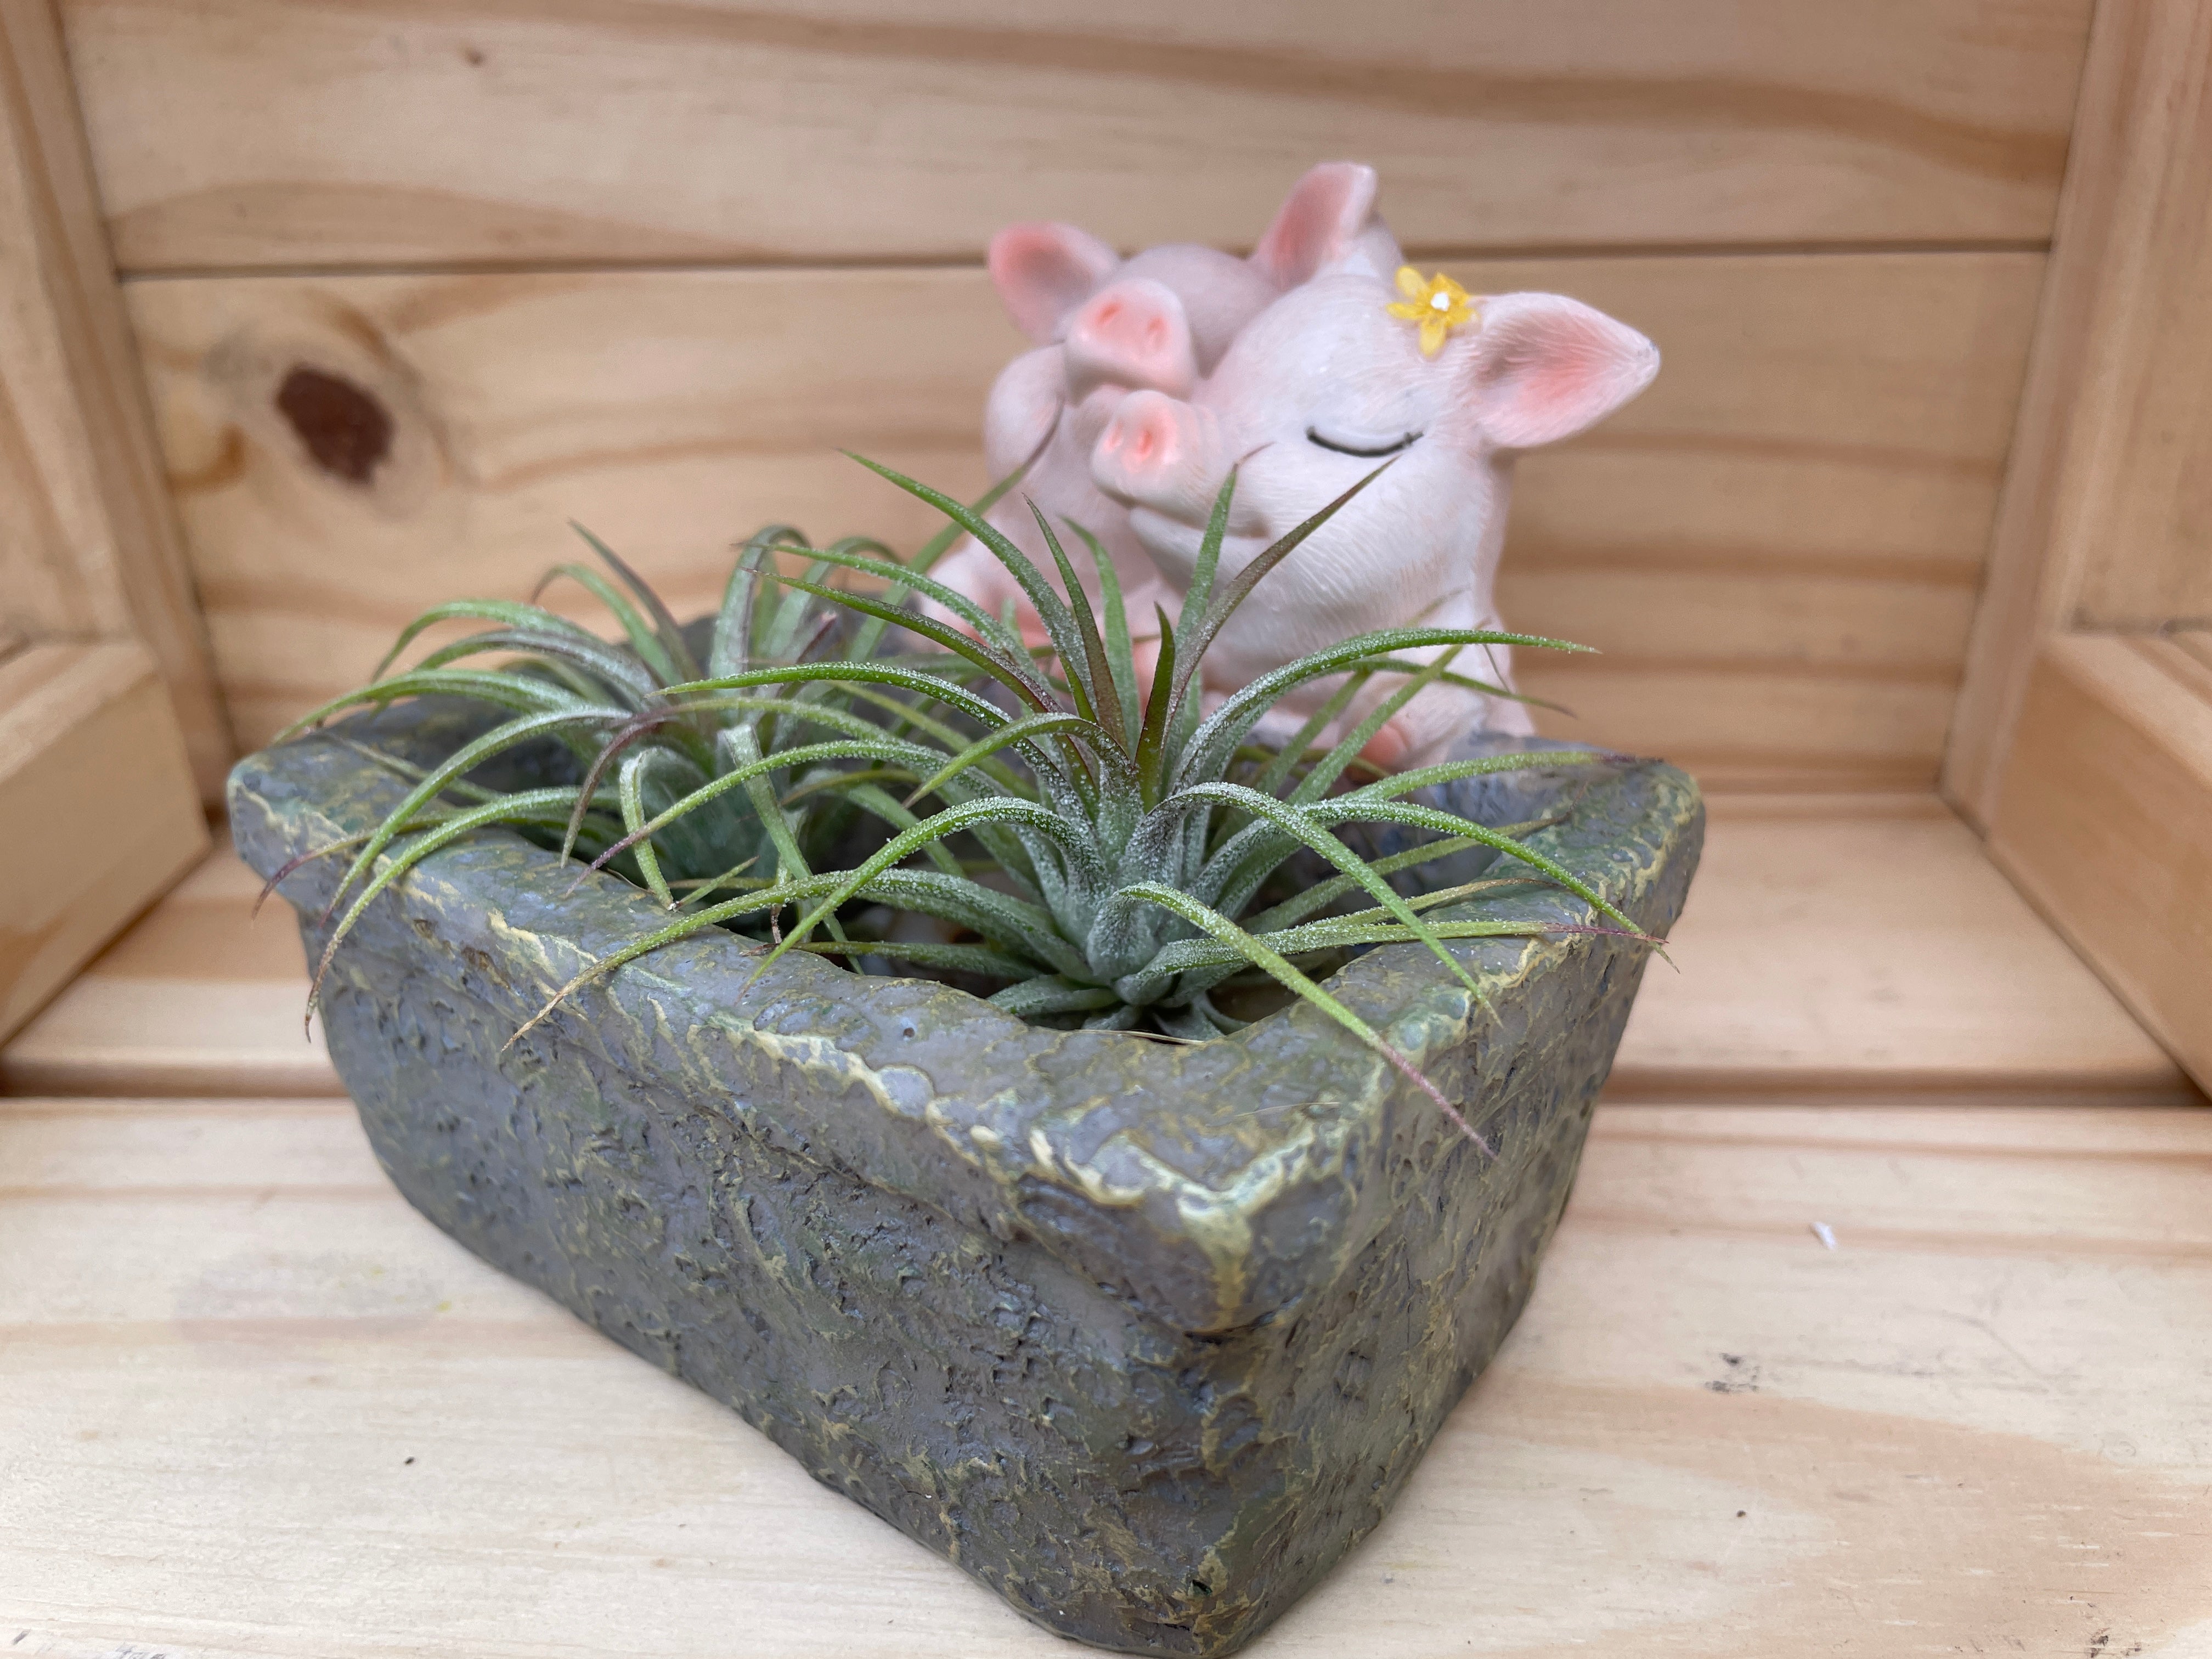 "Mr. and Mrs. Piggy" Set 1 with ASSORTED Airplants